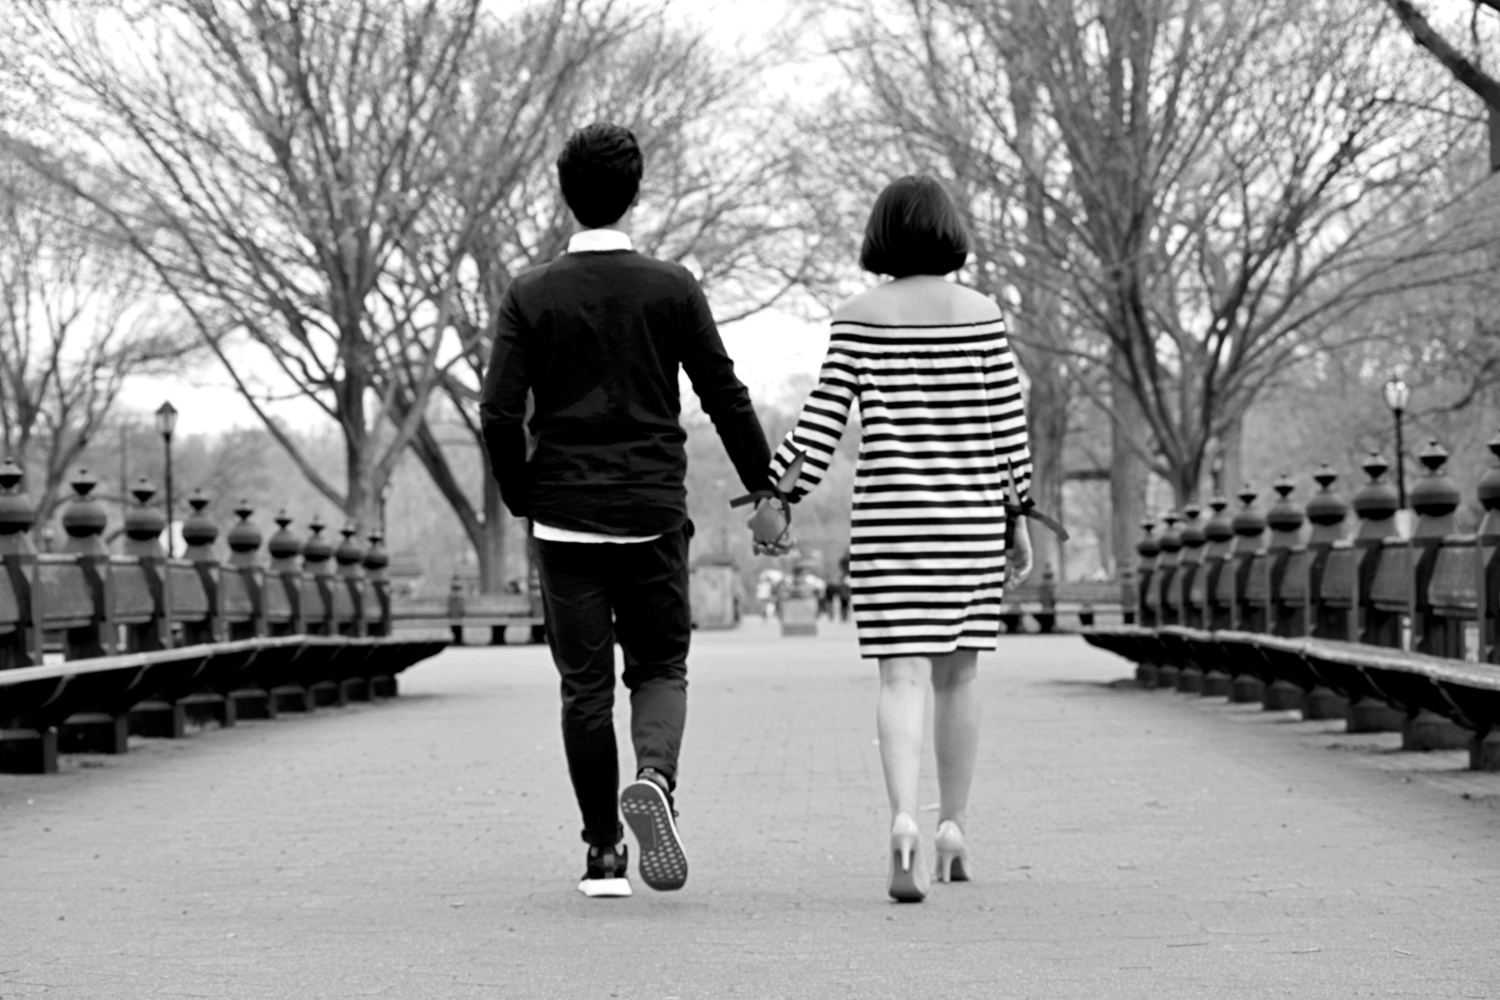  Literary Walk Central Park Engagement Session Photography NYC Connecticut, catholic photographer 